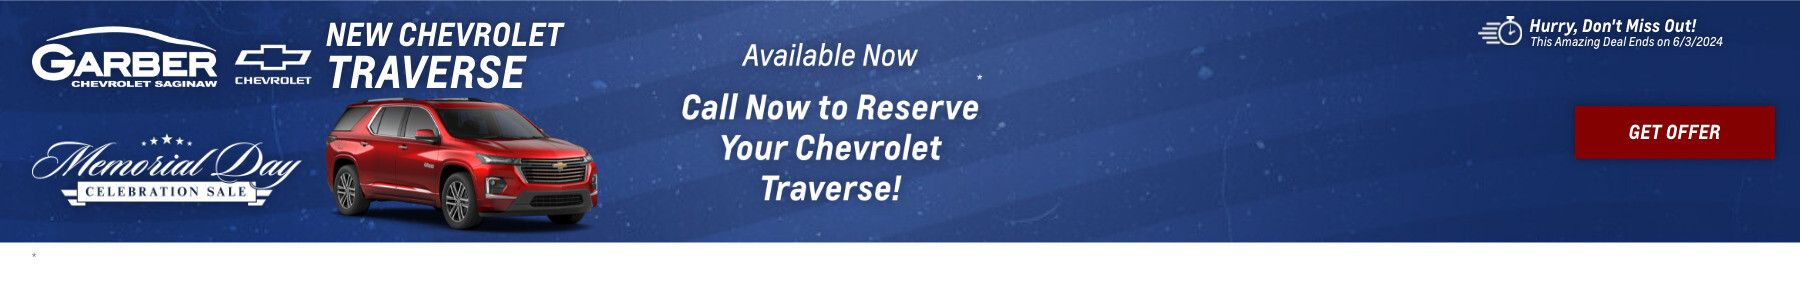 New Chevrolet Traverse Current Deals and Offers in Saginaw, MI